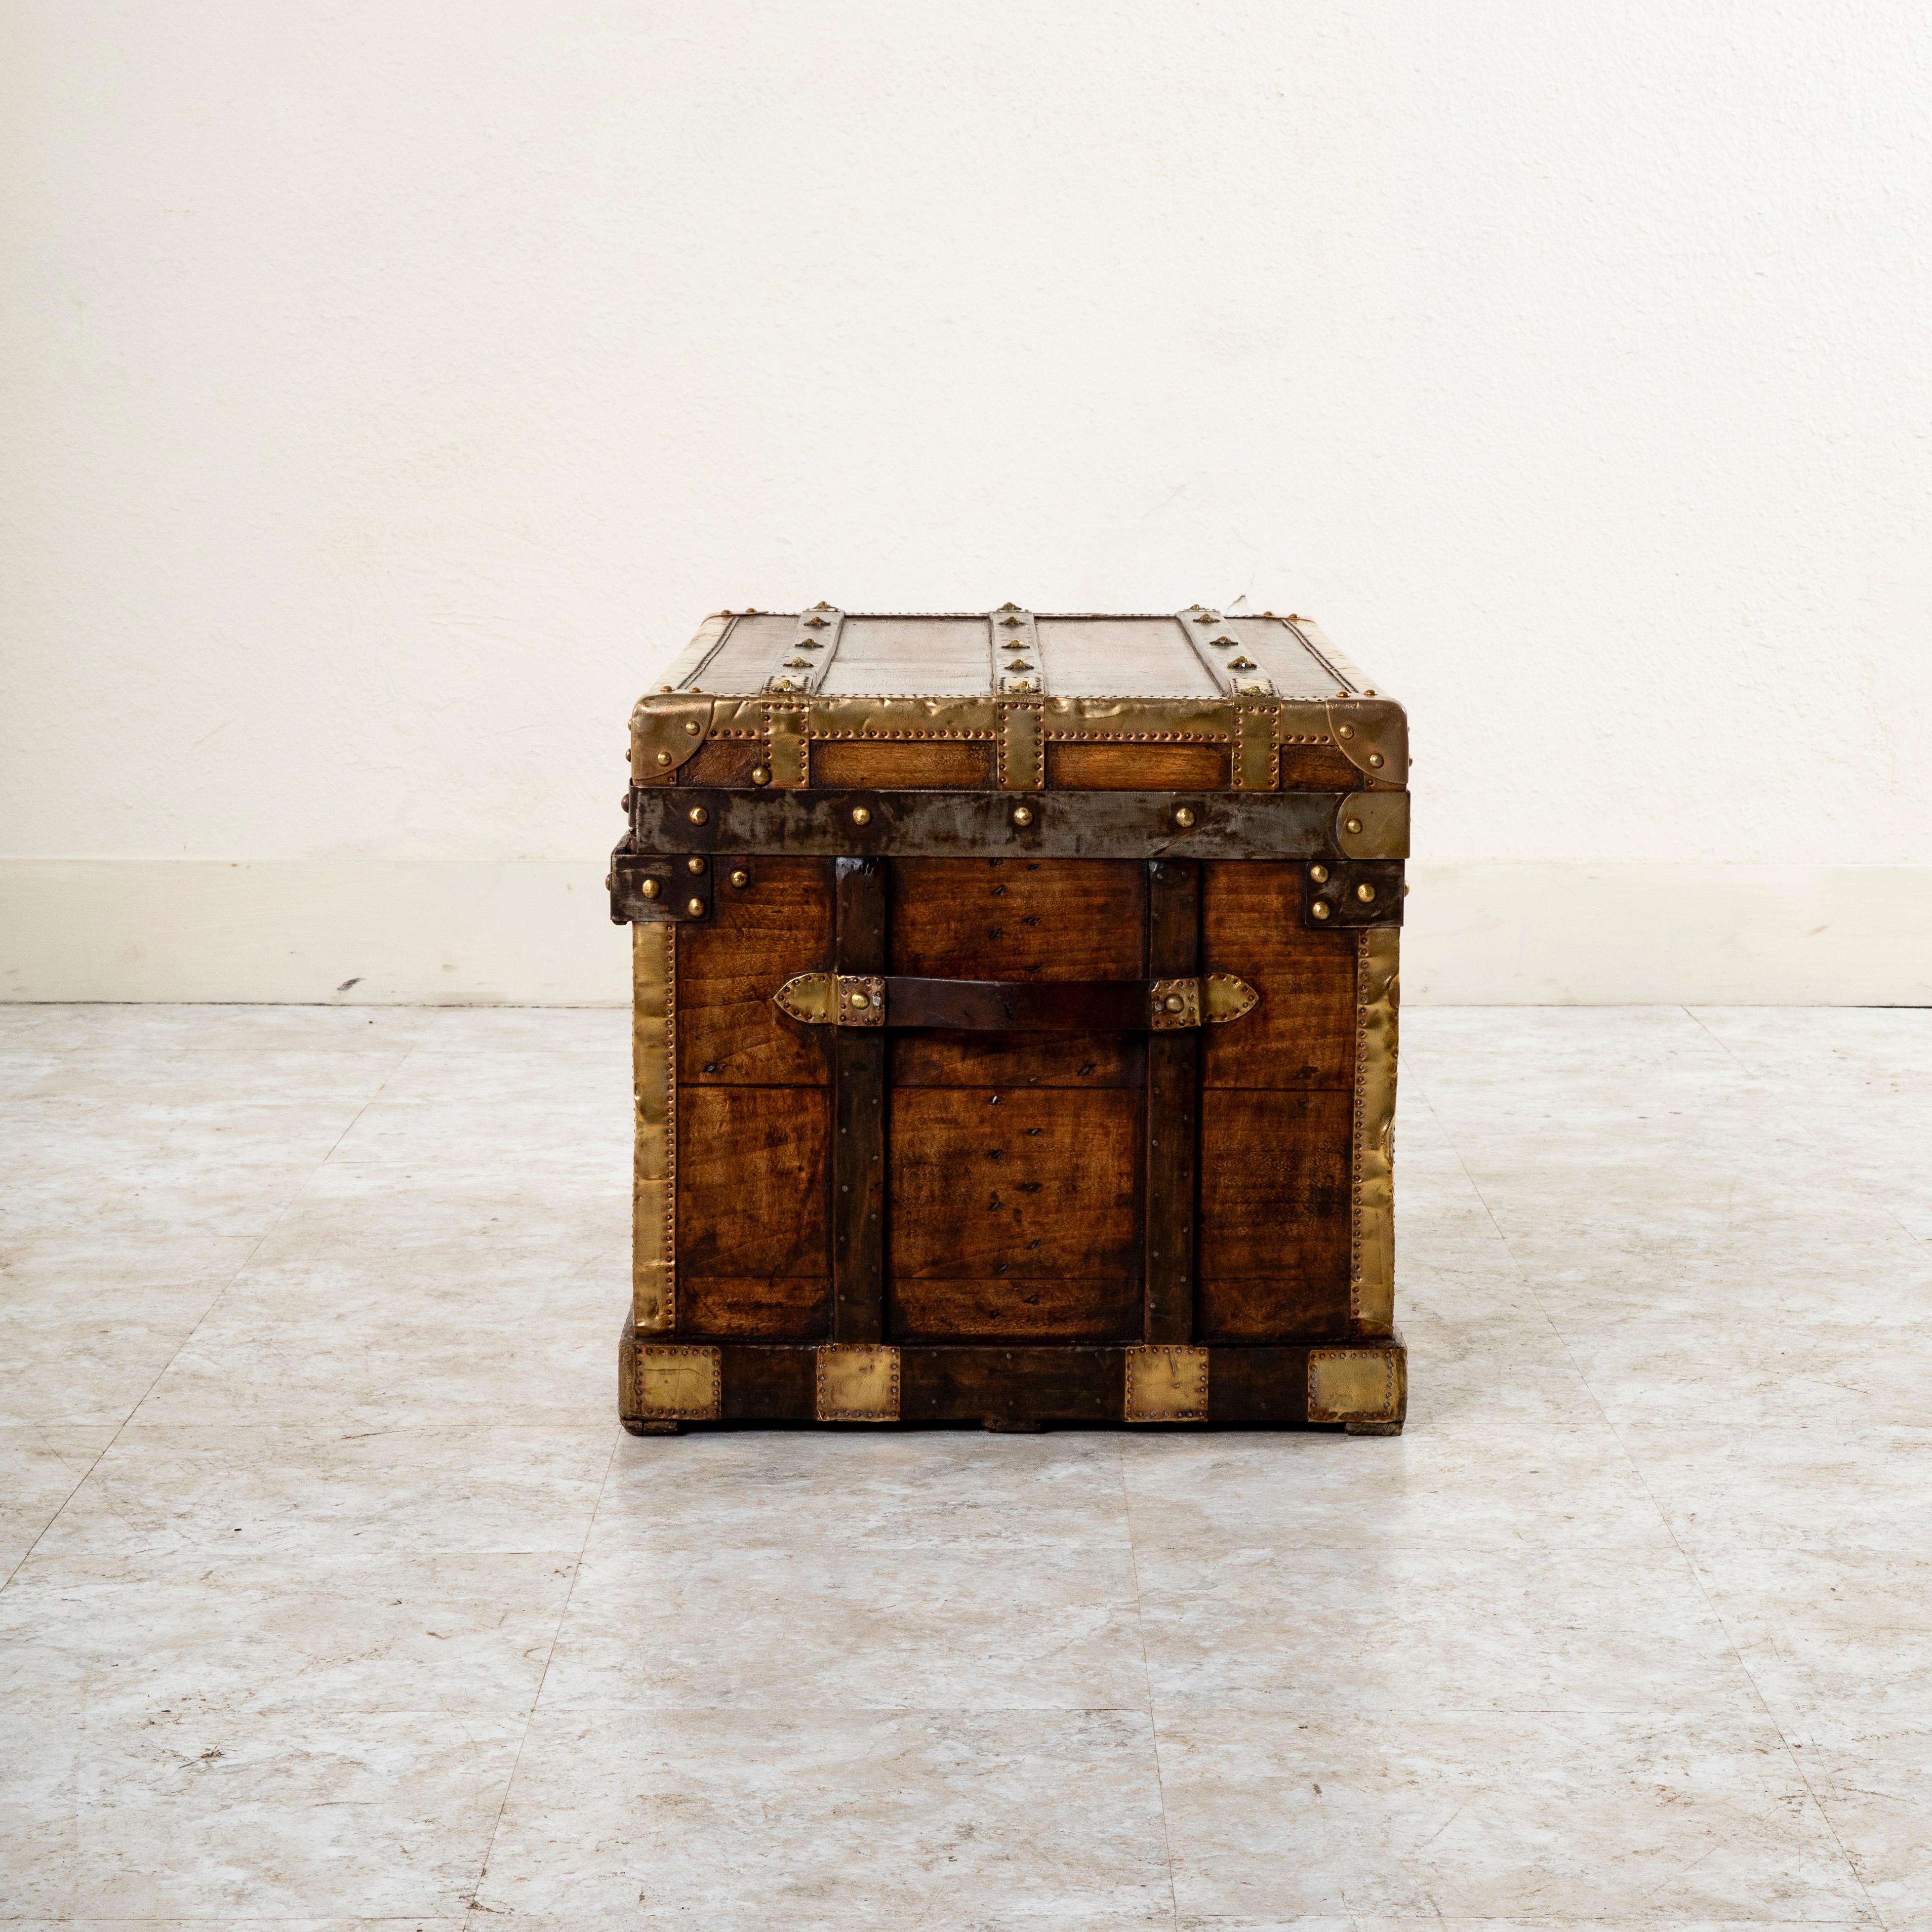 French Wooden Steam Trunk with Runners, Brass, Iron, Leather Details, circa 1880 For Sale 2